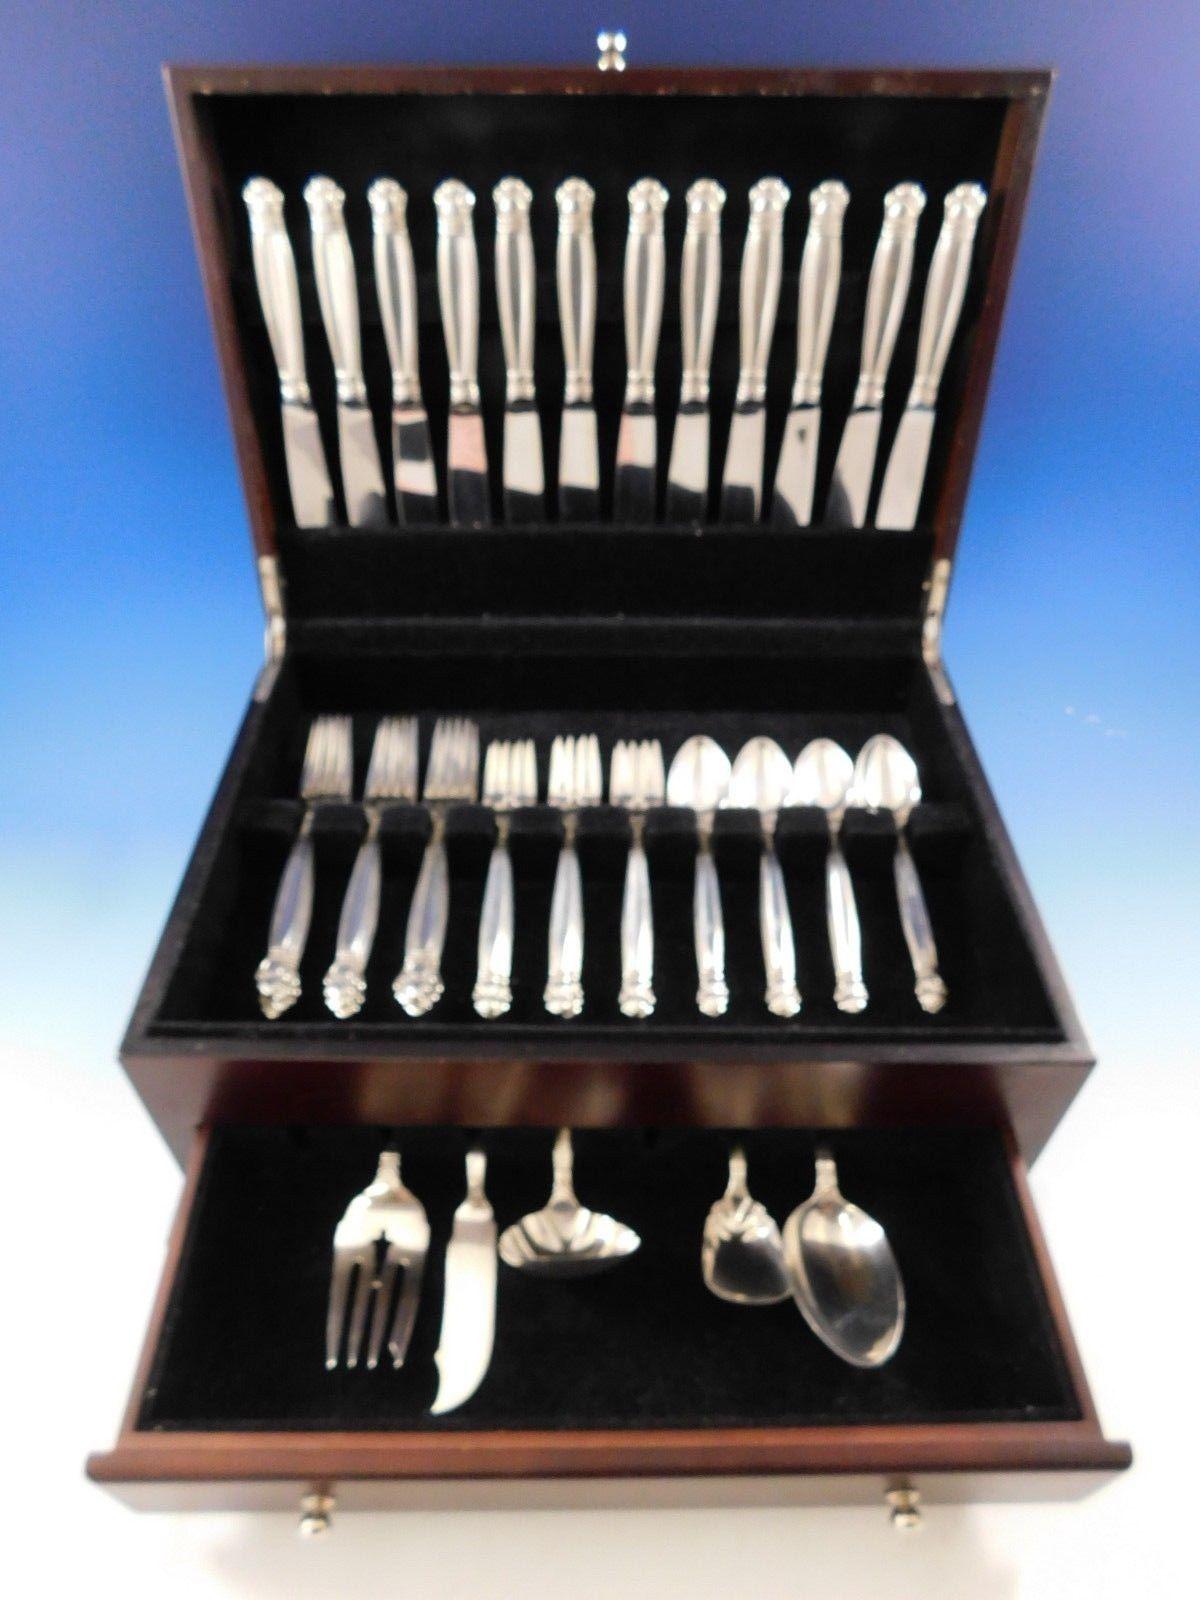 Lovely Scandinavian design copenhagen by Manchester sterling silver flatware set of 53 pieces. This set includes:

12 knives, 8 3/4